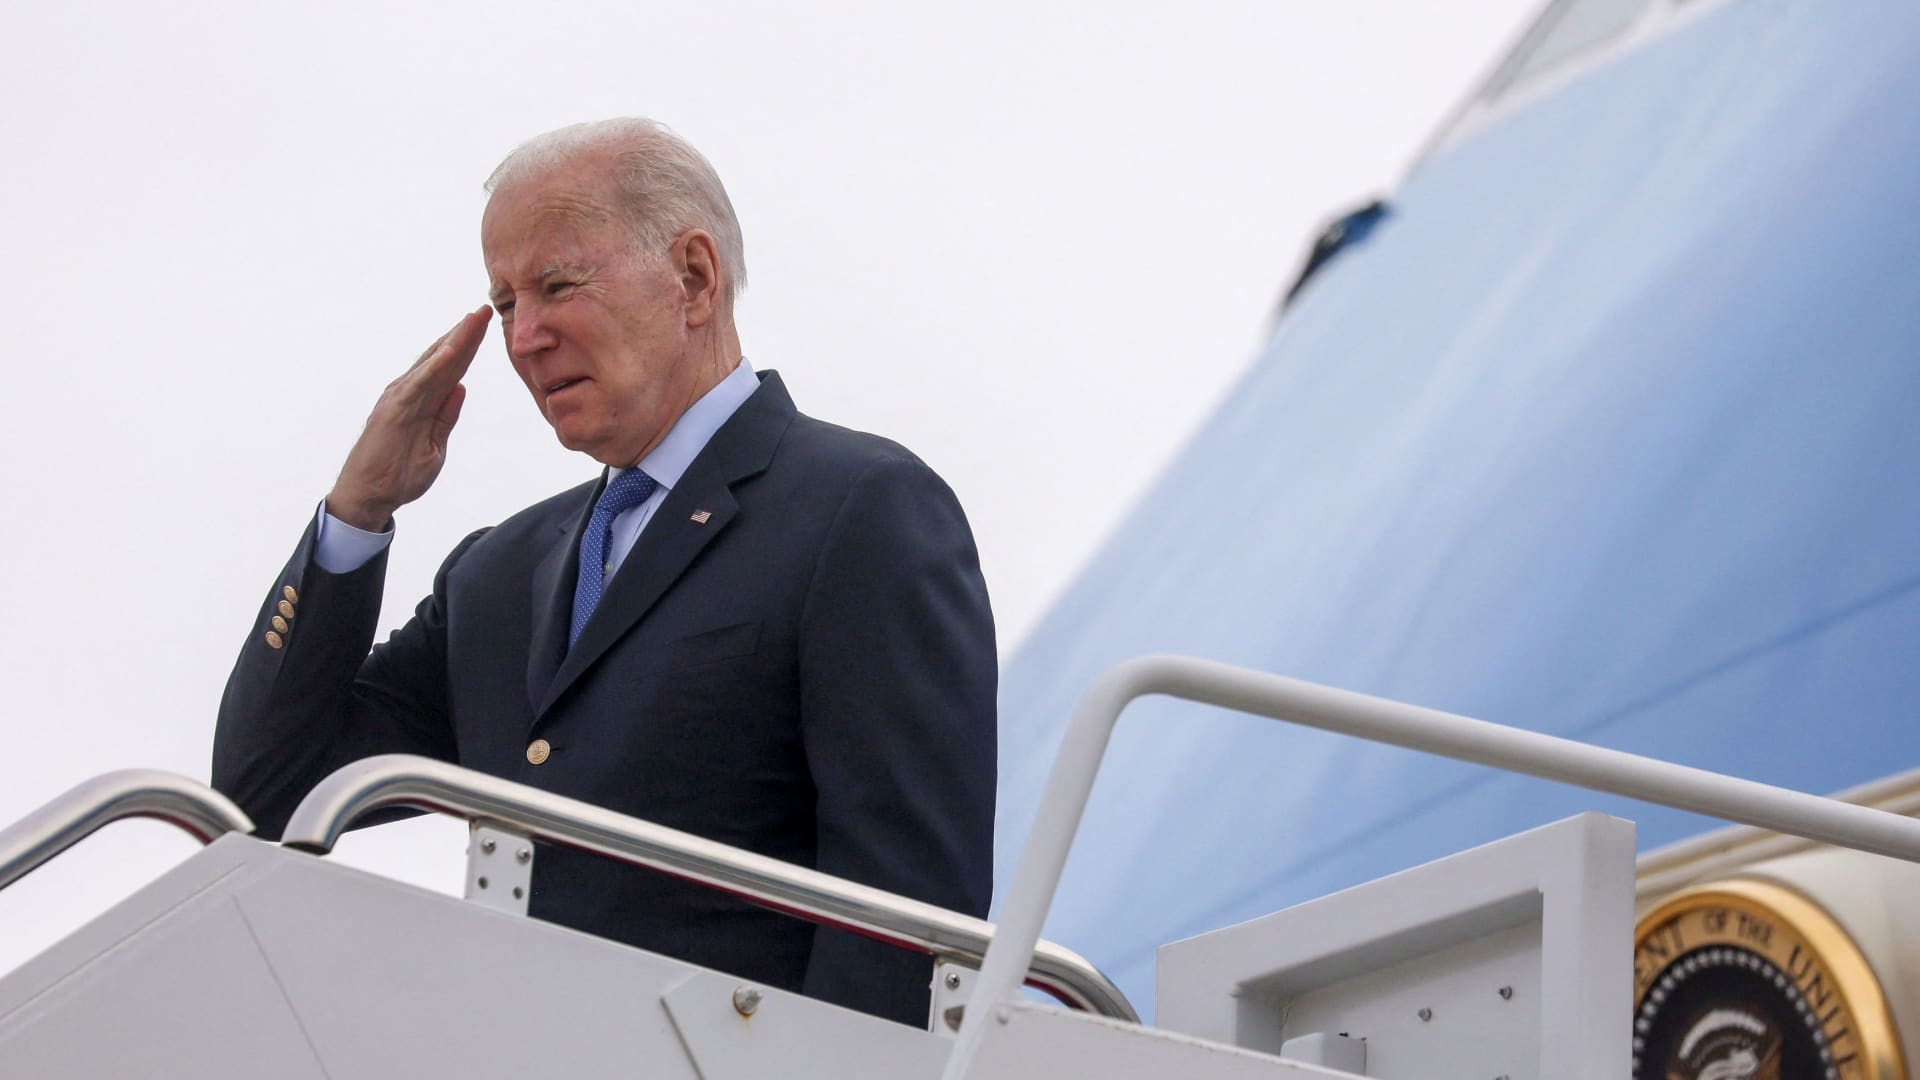 U.S. President Joe Biden boards Air Force One at Joint Base Andrews in Maryland en route to Brussels, Belgium, where he will attend and deliver remarks at an extraordinary NATO summit to discuss ongoing deterrence and defense efforts in response to Russia's attack on Ukraine, March 23, 2022.